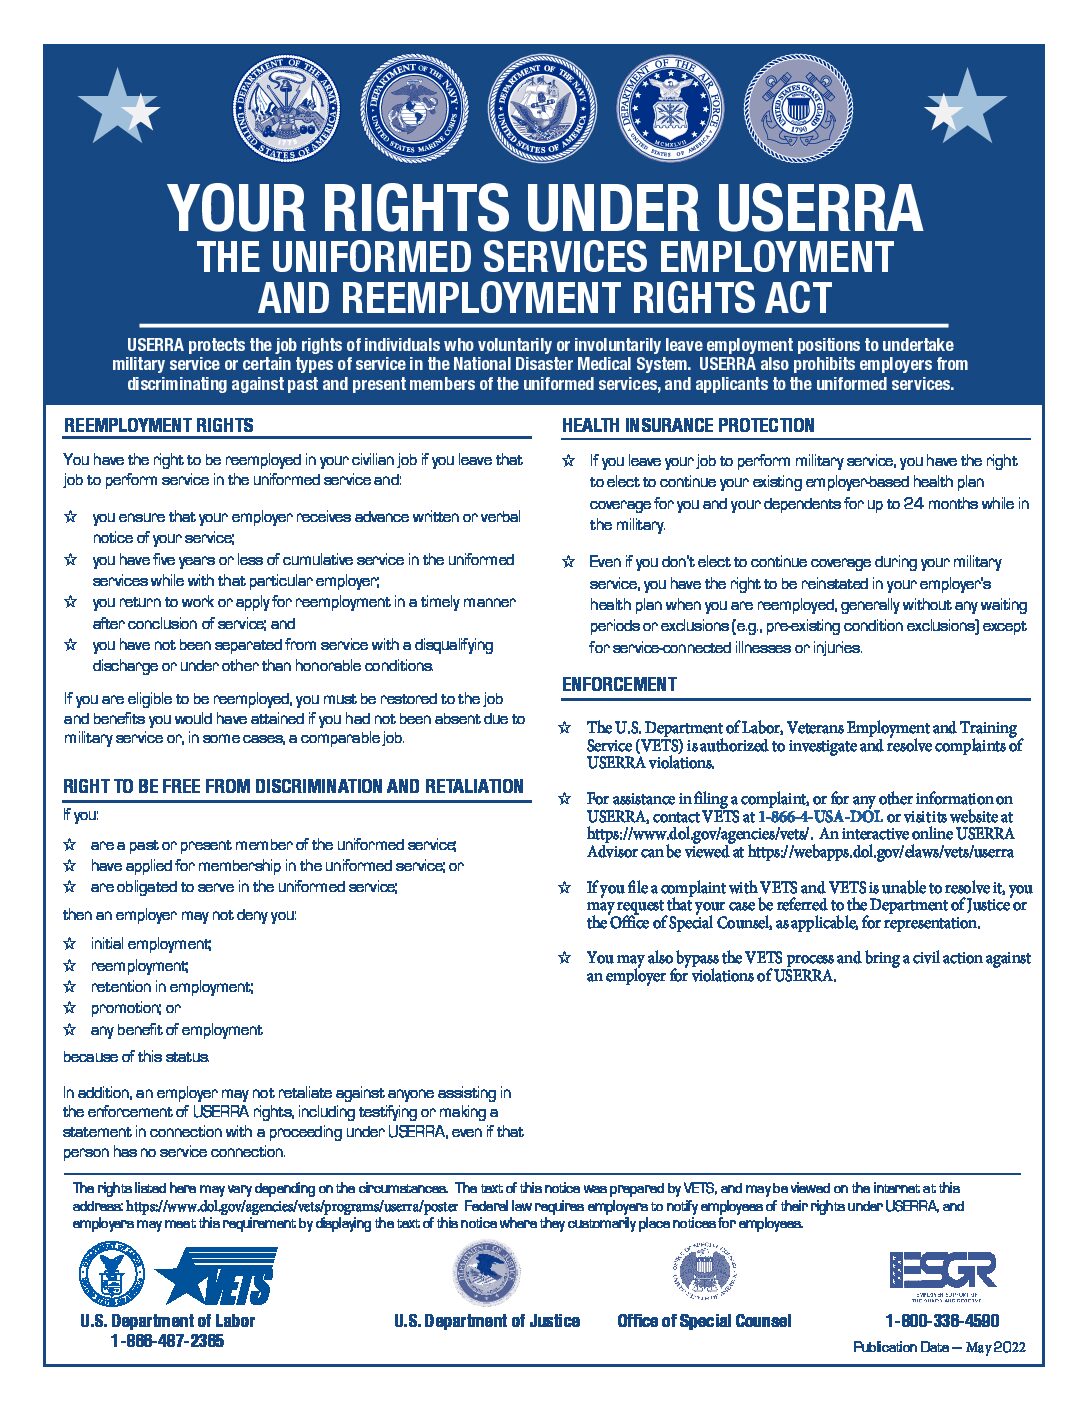 Uniformed Services Employment and Reemployment Rights Act poster